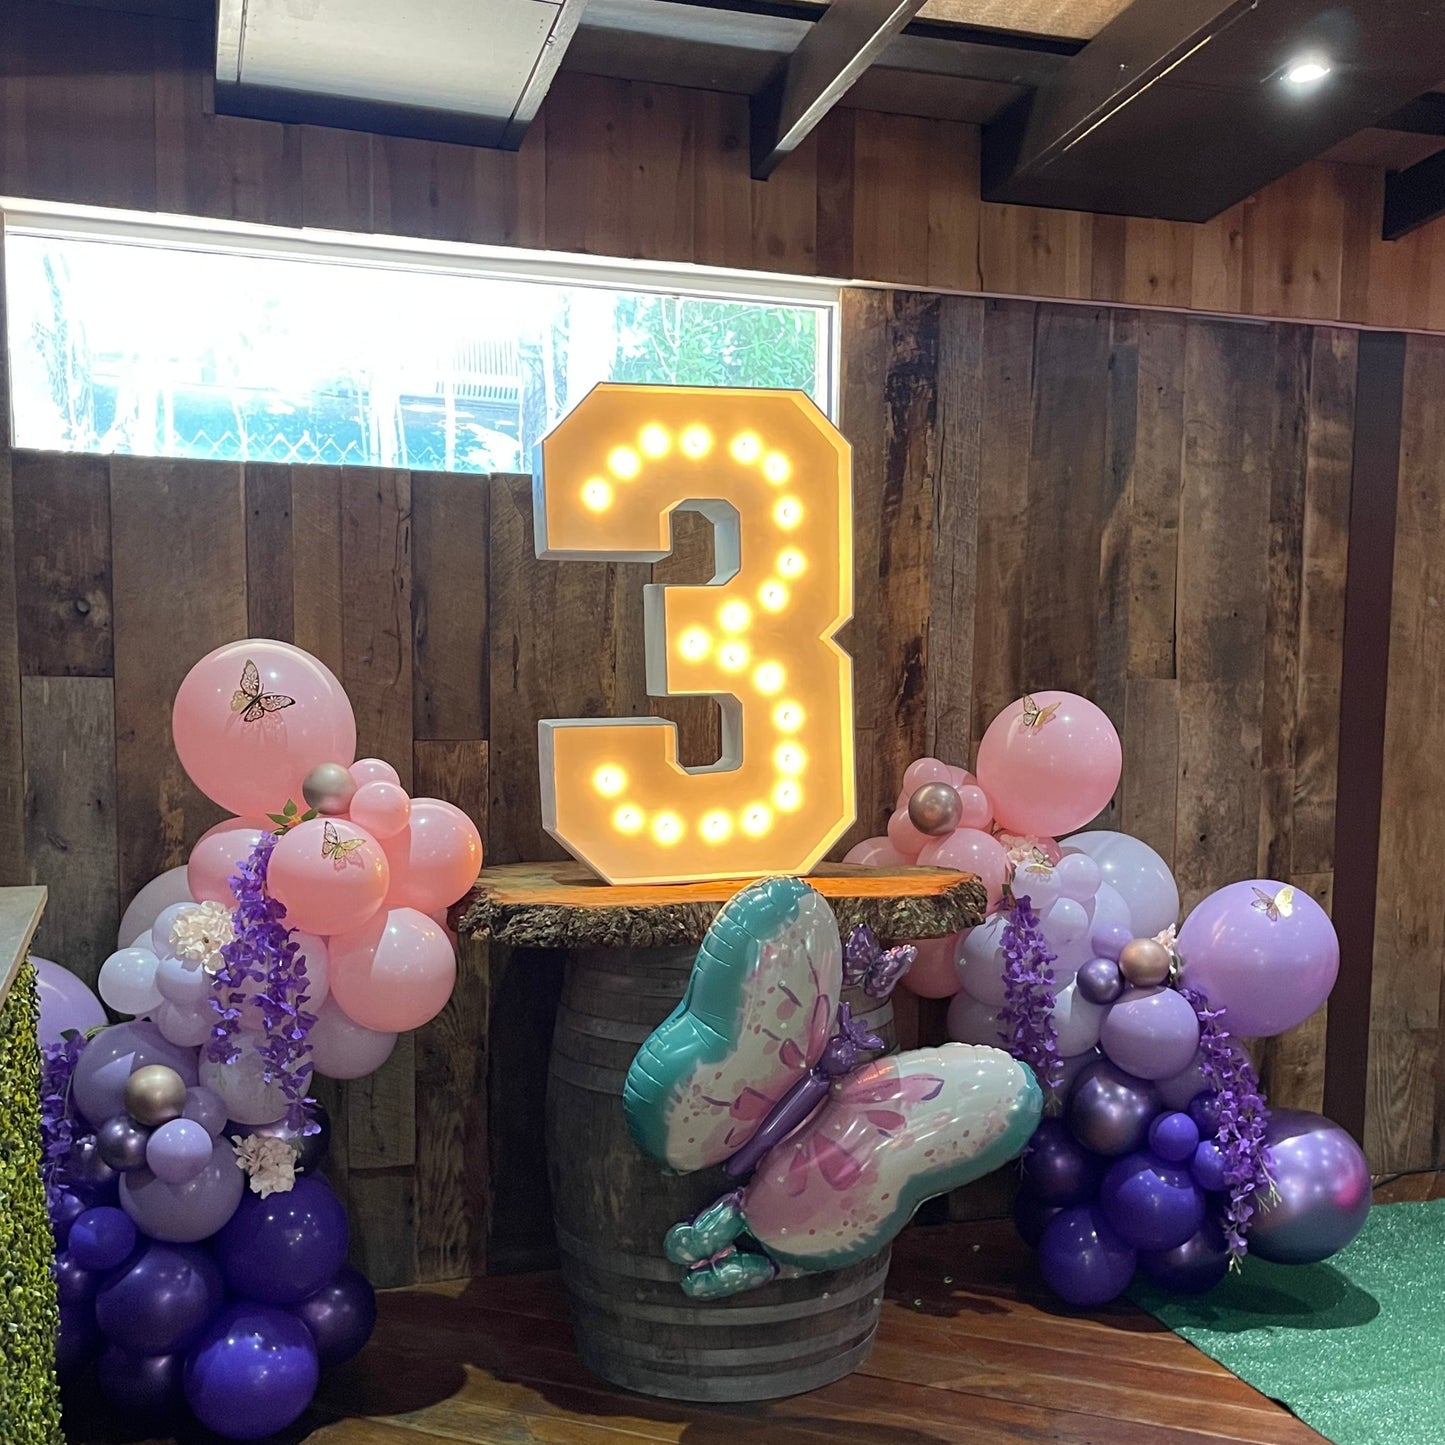 Marquee Letters & Numbers Rental - Light up!